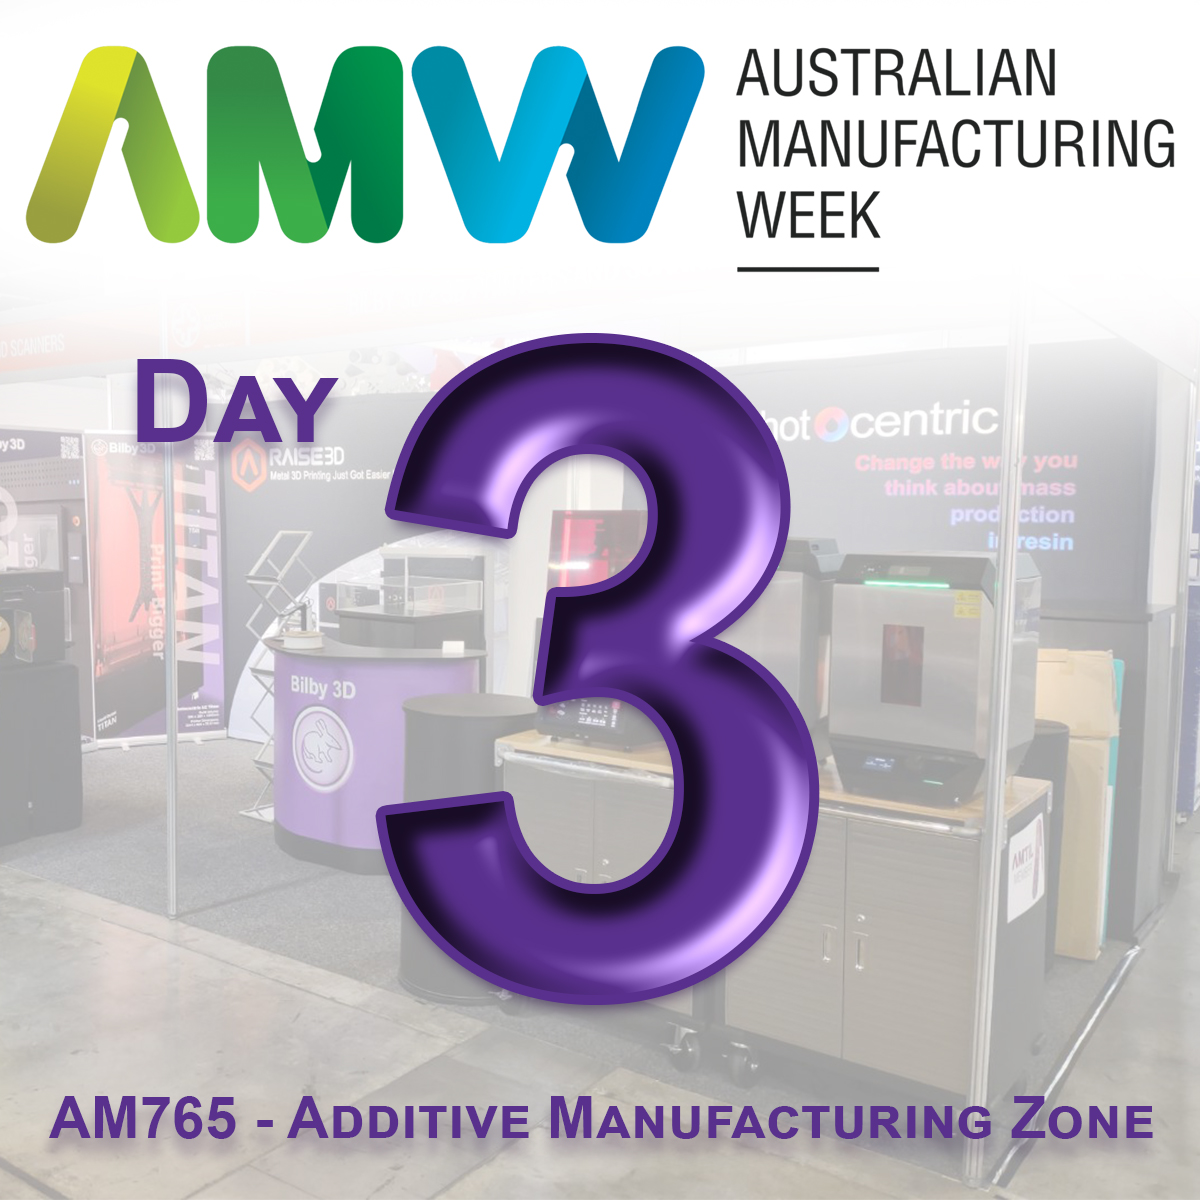 Today is the FINAL DAY of AMW and time is running out, if you haven't come to see us already make your way down to booth AM765.

Explore the endless possibilities that our additive manufacturing solutions can do for you and your business!

@AMTIL_AUS  #AMW24 #expo